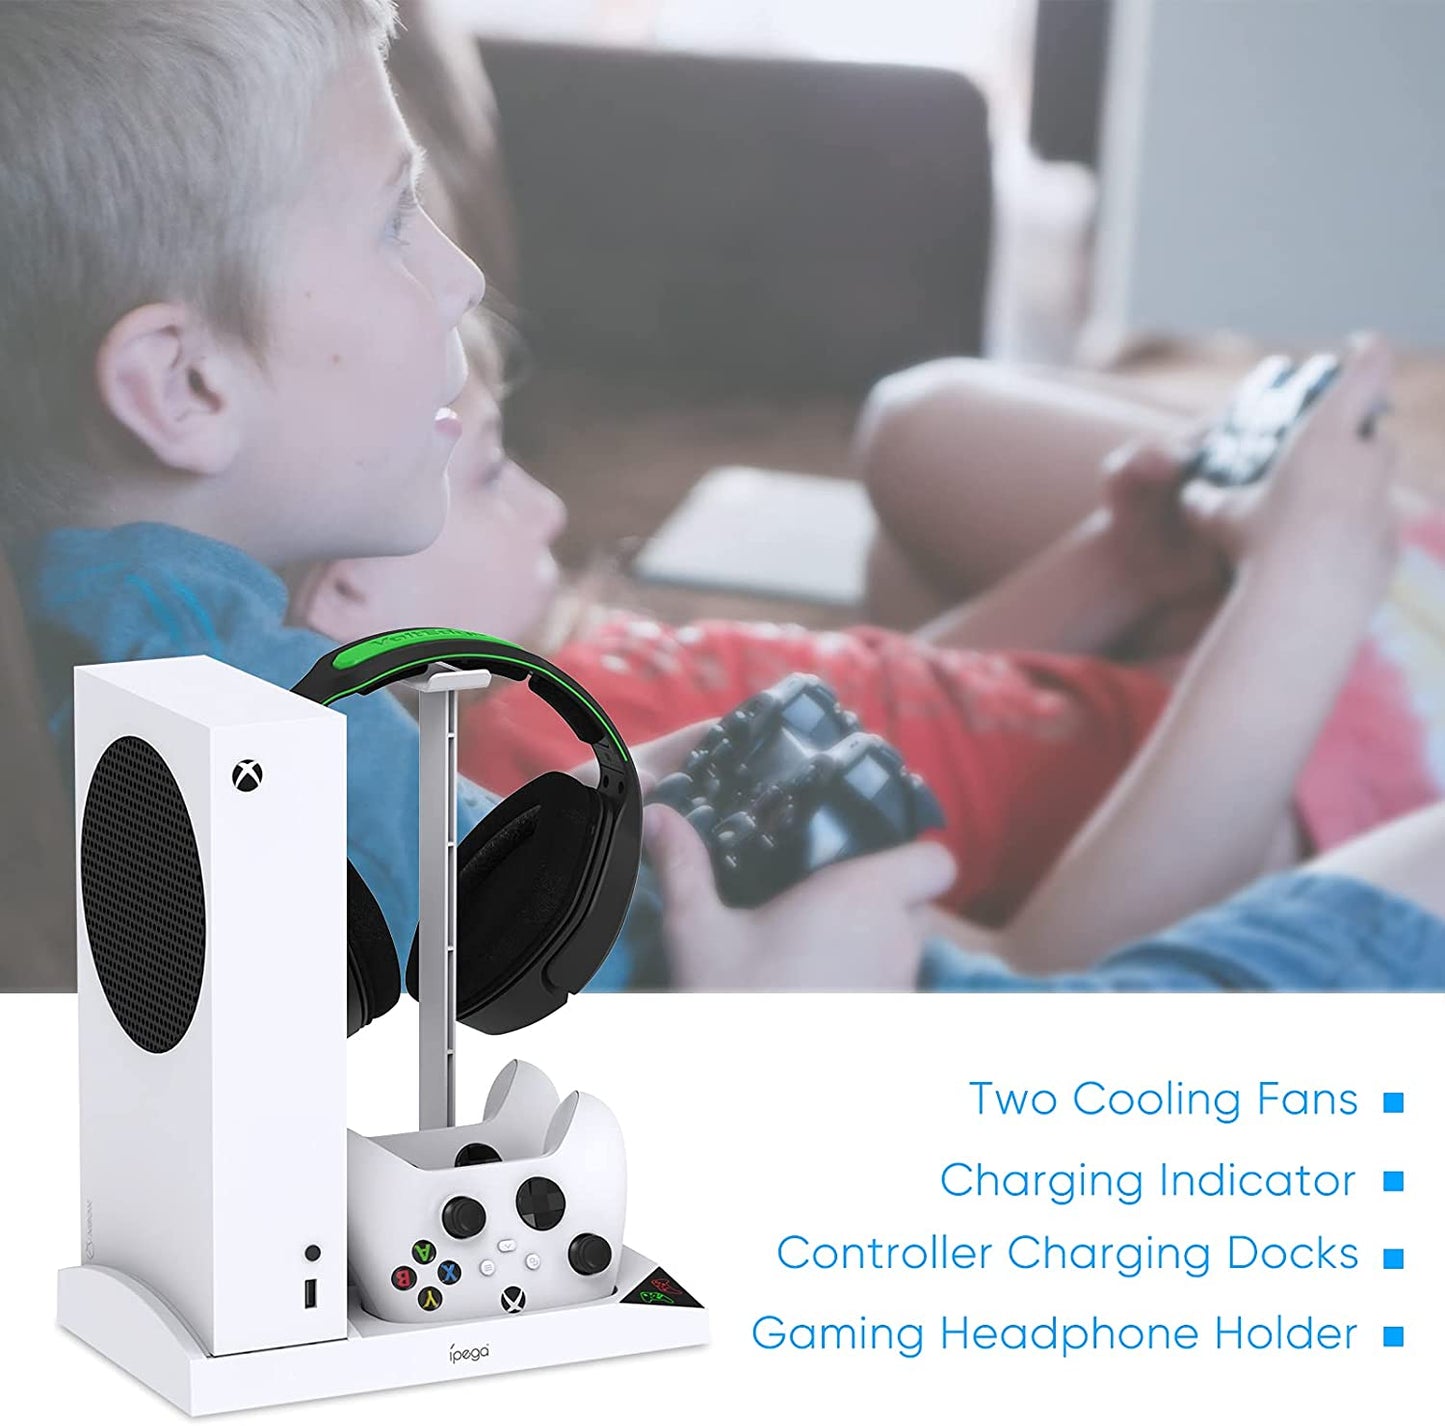 Vertical Cooling Fan Stand for Xbox Series S with Dual Controller Charging Dock Station, 2 X 1400mAh Rechargeable Battery Pack, and Headphone Bracket - White